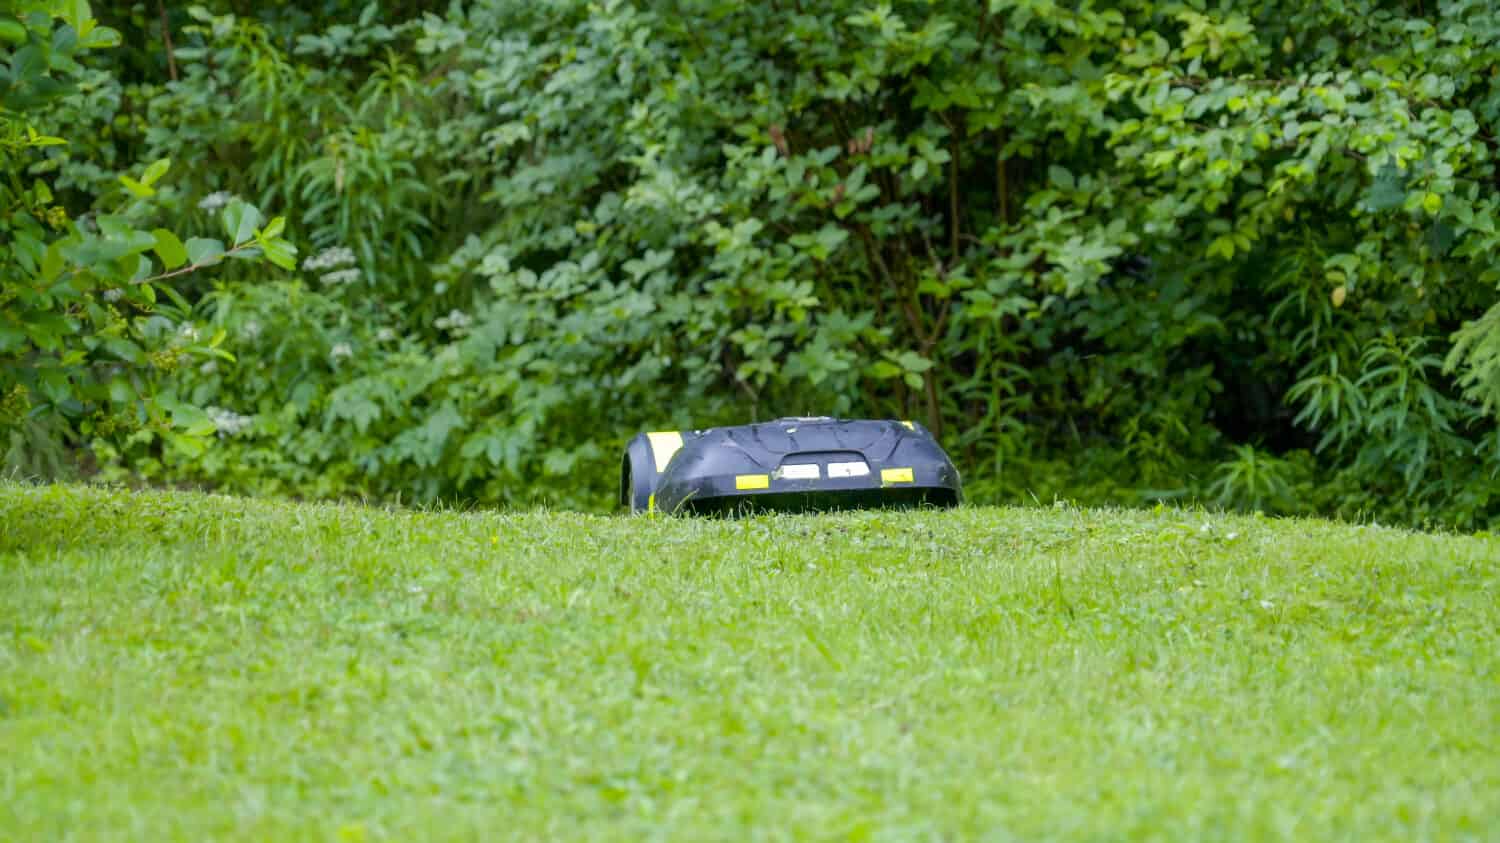 An automower moving on the green grass. Its looks like a small remote controlled car